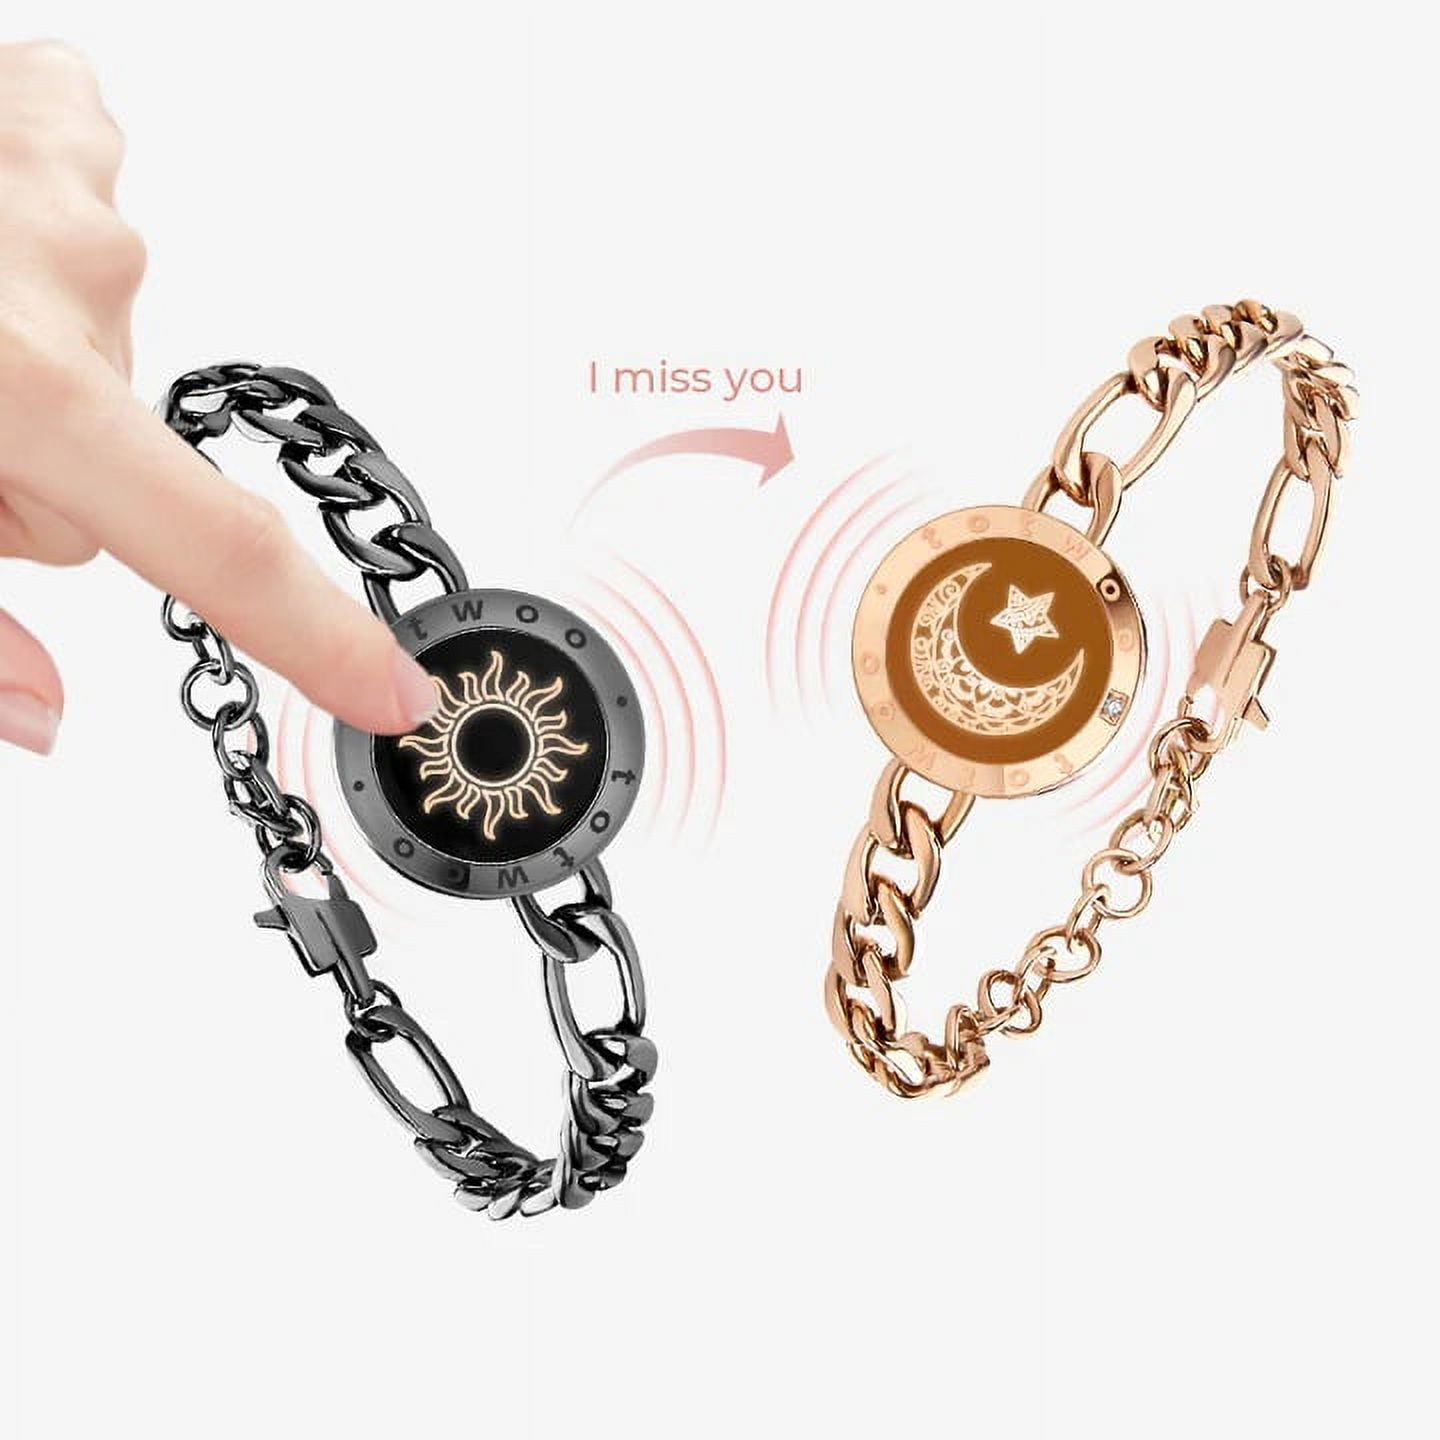 Totwoo Long Distance Touch Bracelets Couples Relationship Light up Vibrate Smart Bluetooth Connecting Jewelry Sun Moon Snake Chain Black Gold dc290091 00d0 4c40 827d e39be955251d.8f1f8447d80241967d6210a5c55e8fed